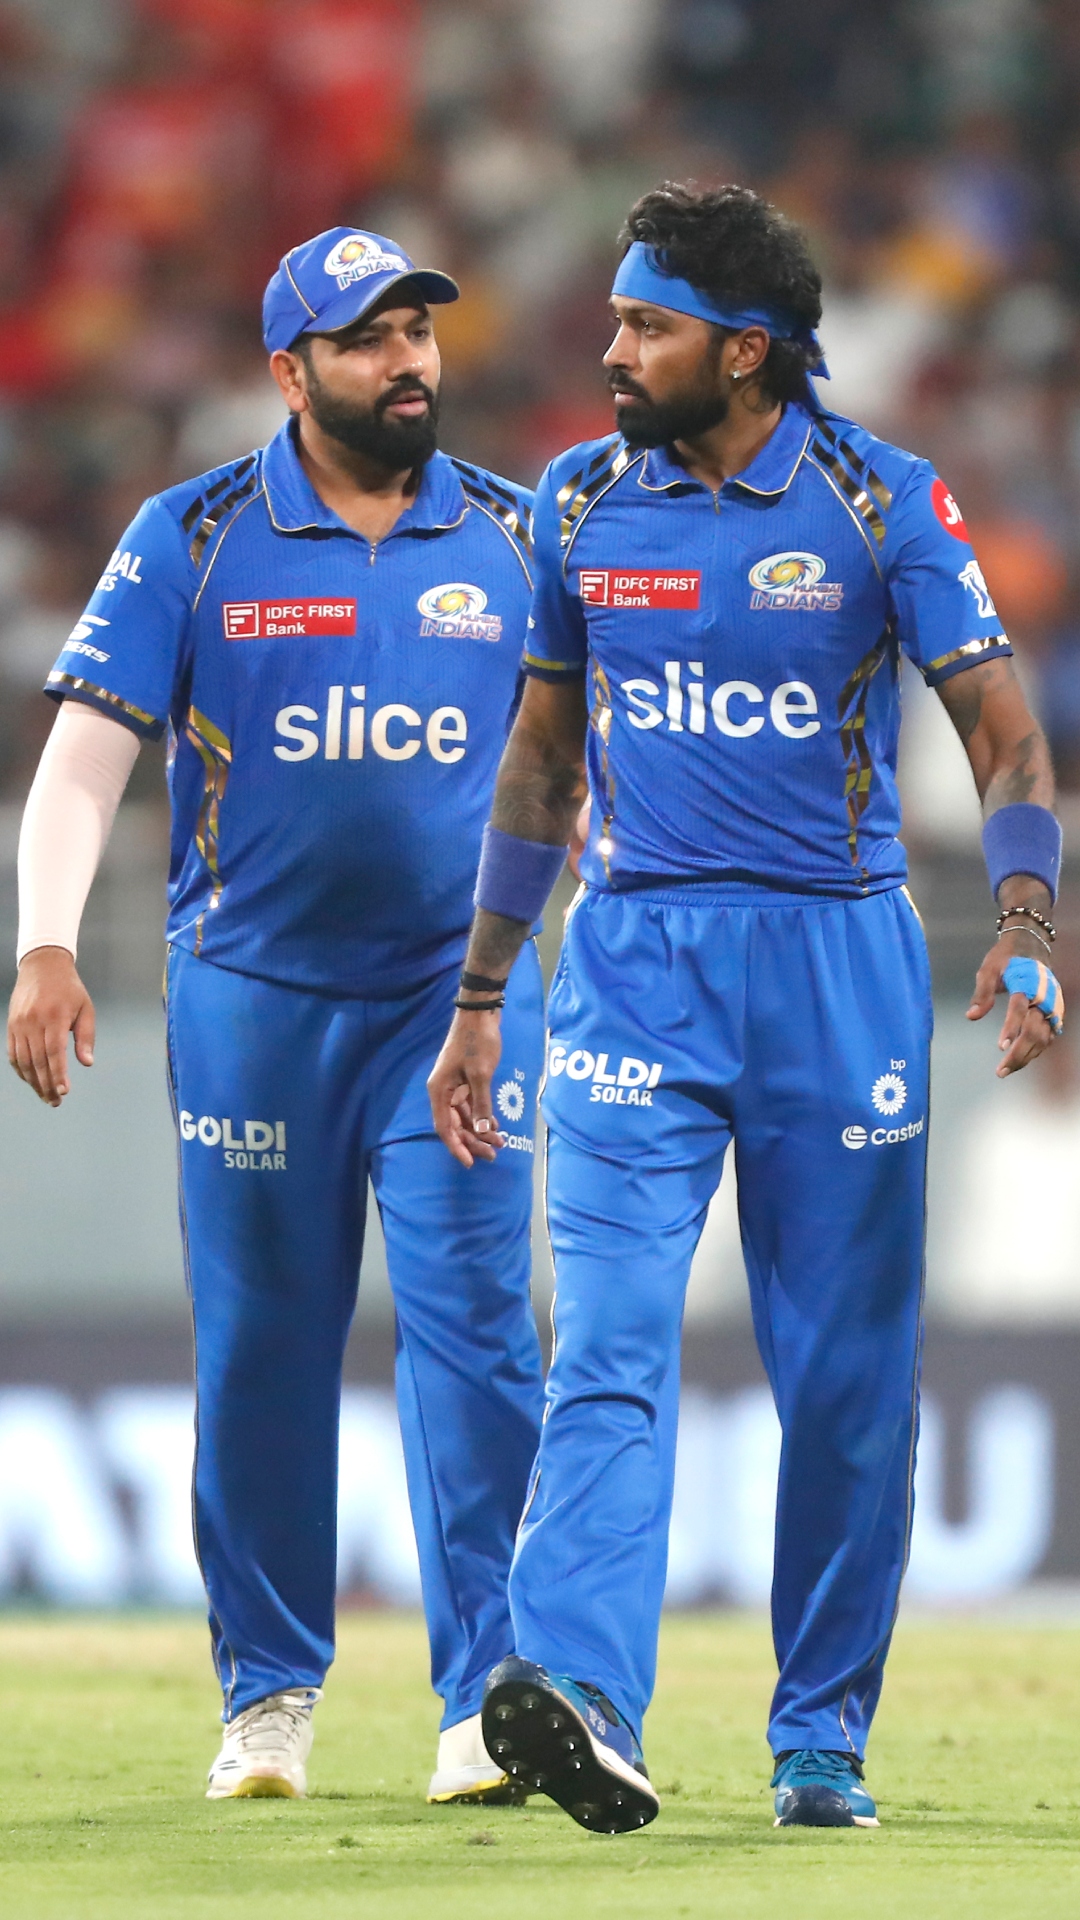 Players to play most matches for Mumbai Indians in IPL
